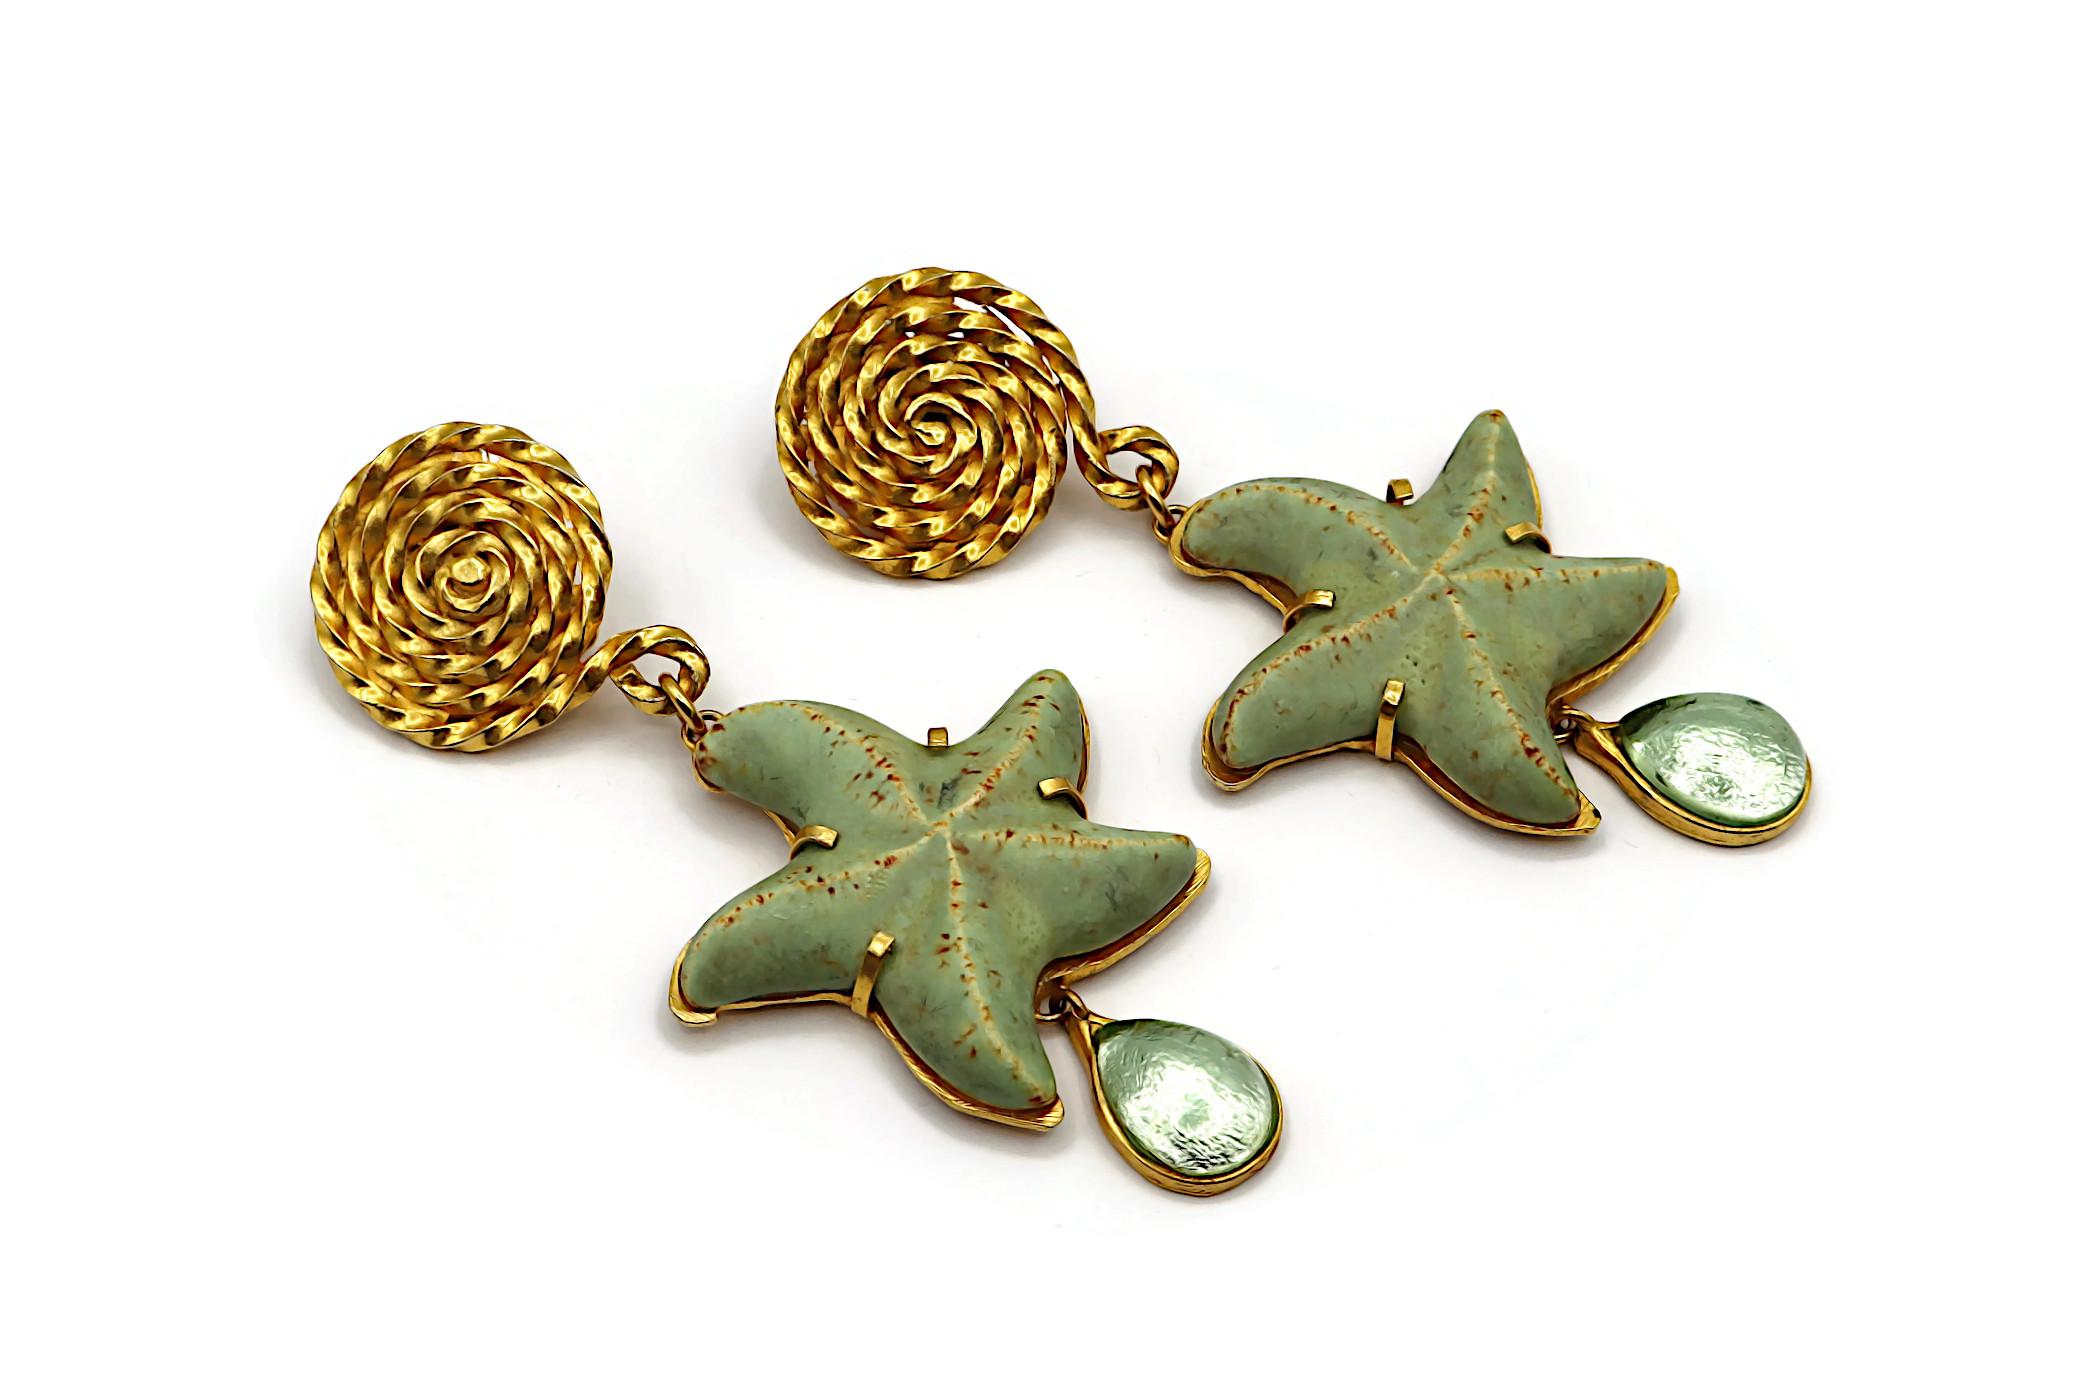 YVES SAINT LAURENT YSL Rive Gauche Vintage Massive Starfish Dangling Earrings In Good Condition For Sale In Nice, FR